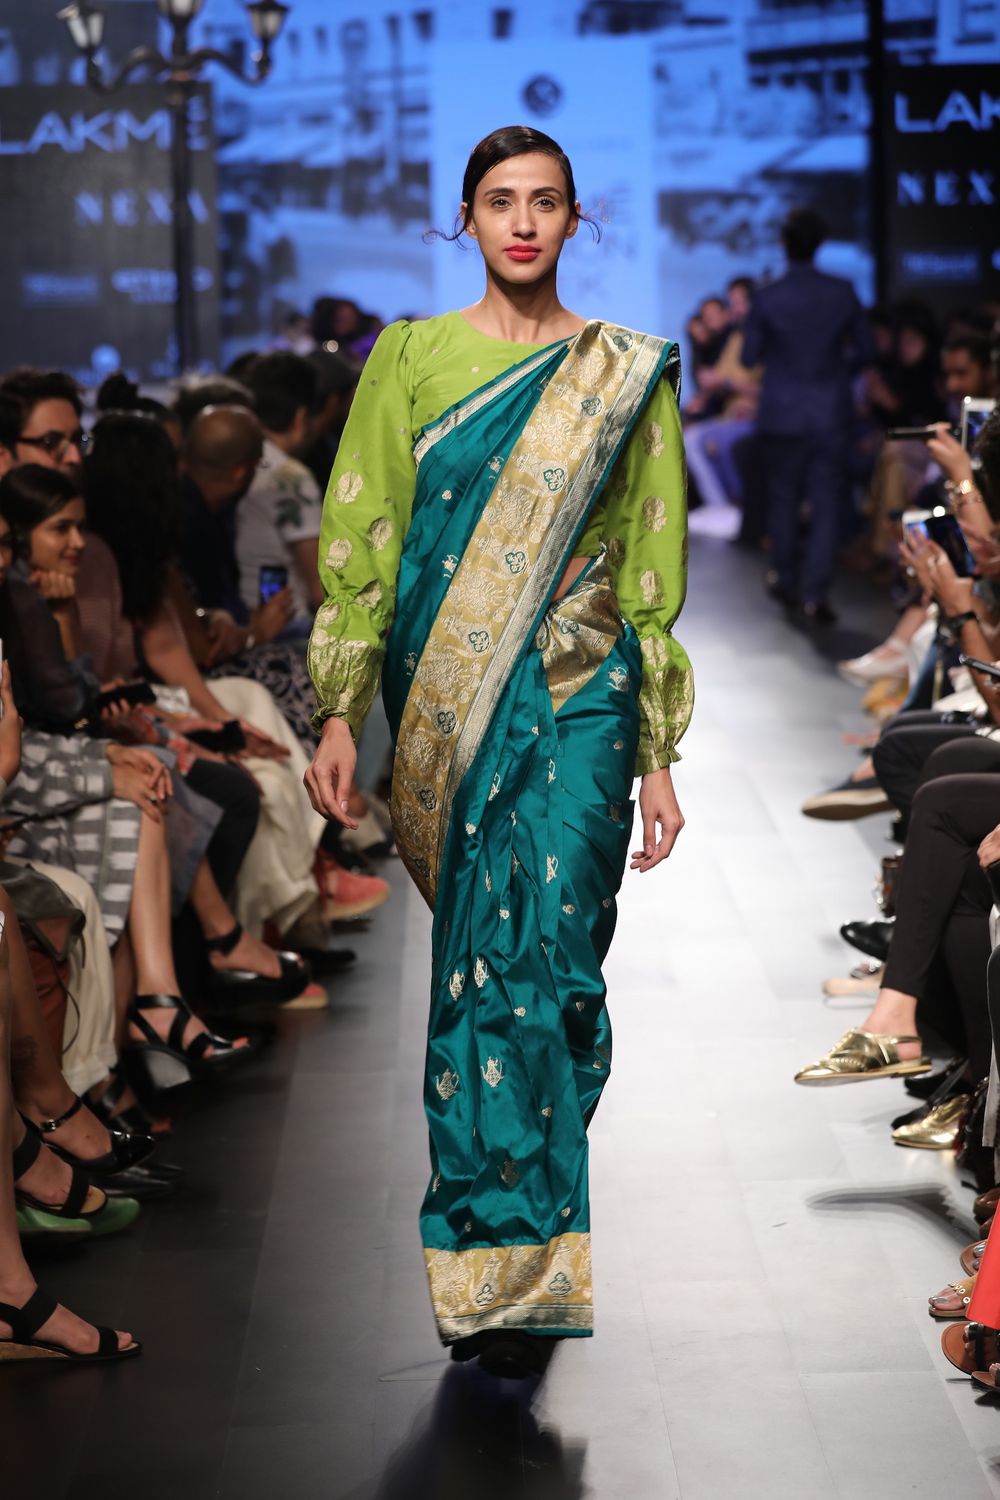 Photo From LFW Winter Rose Collection - By Sailesh Singhania